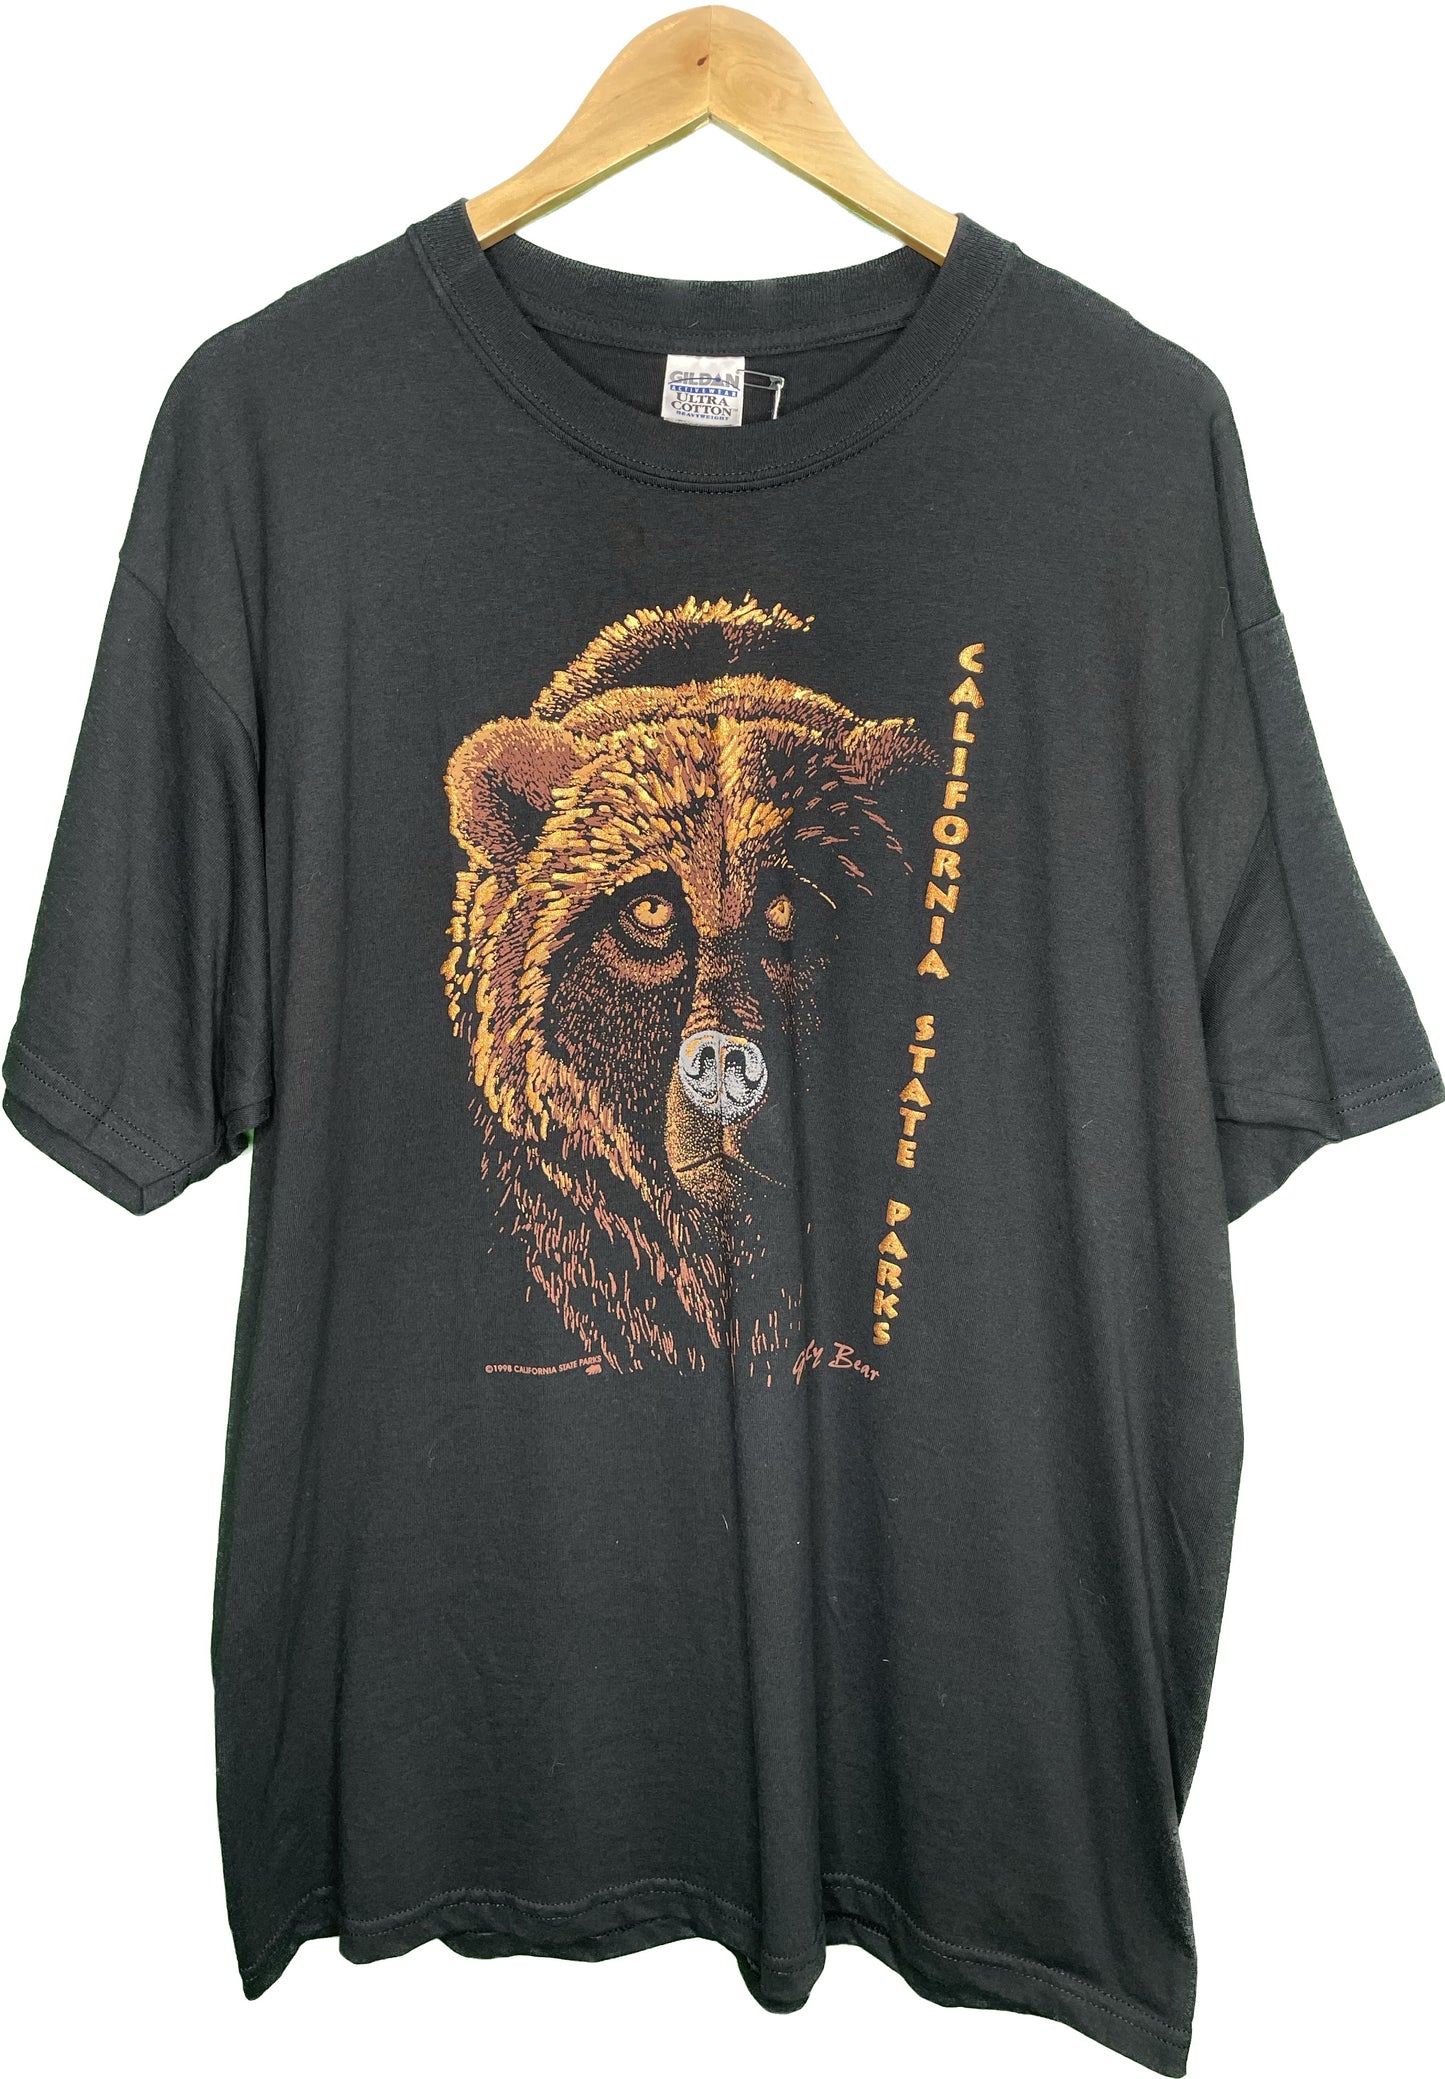 Vintage XL Grizzly Bear California State Parks Shirt